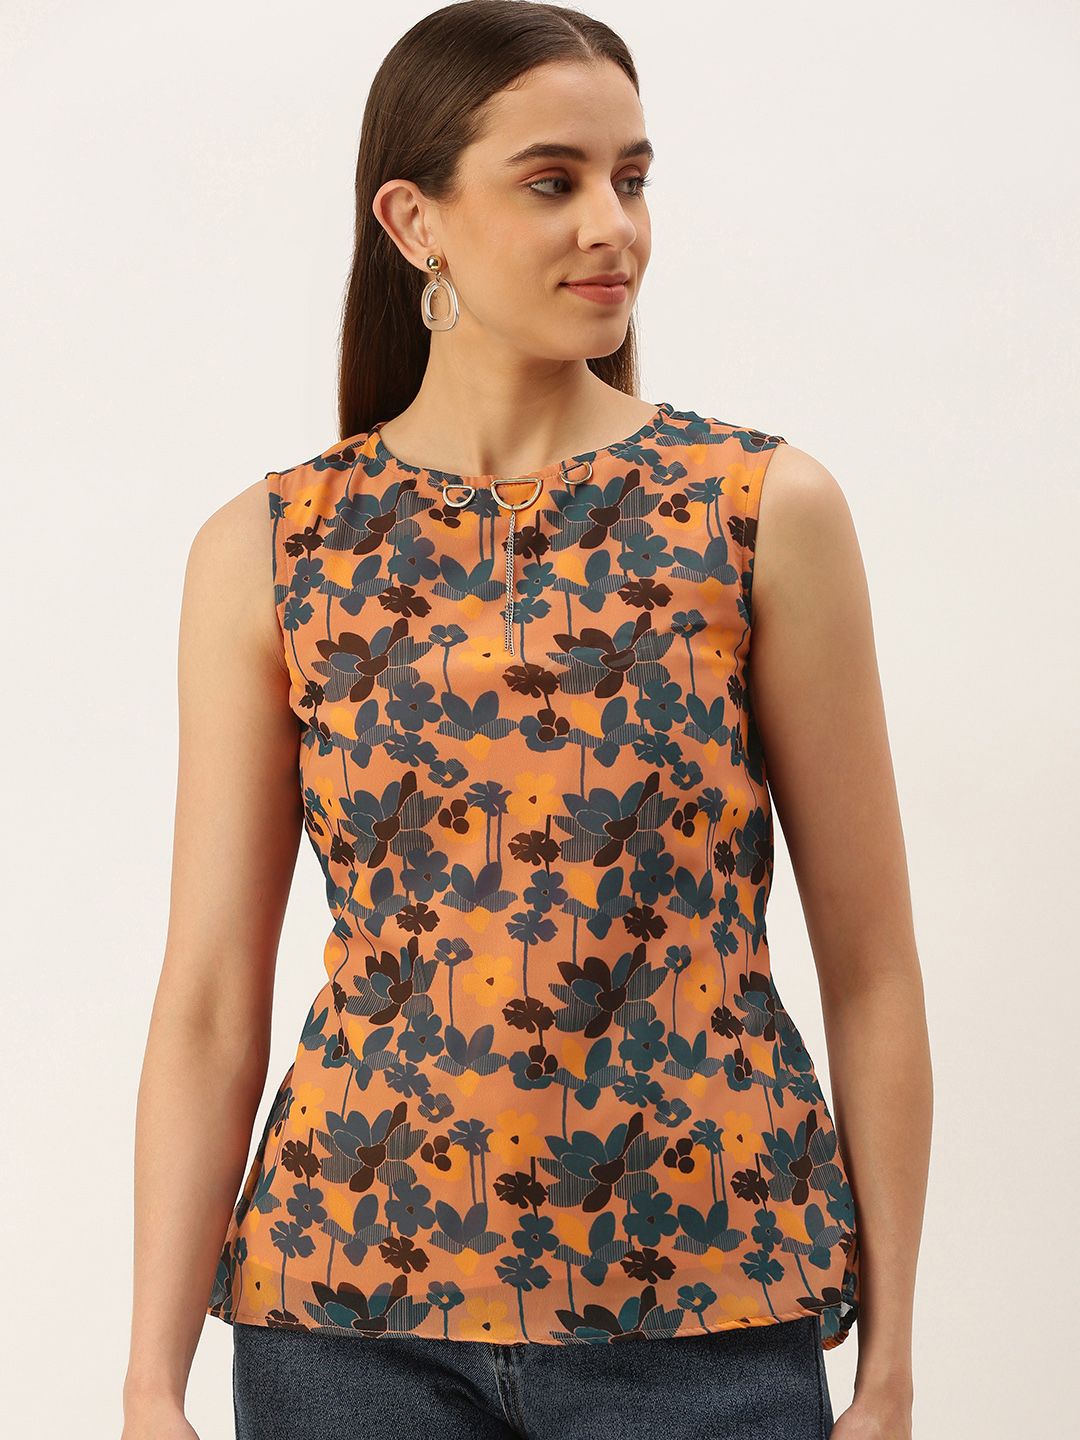 MELOSO Rust & Blue Floral Print Georgette Top Price in India